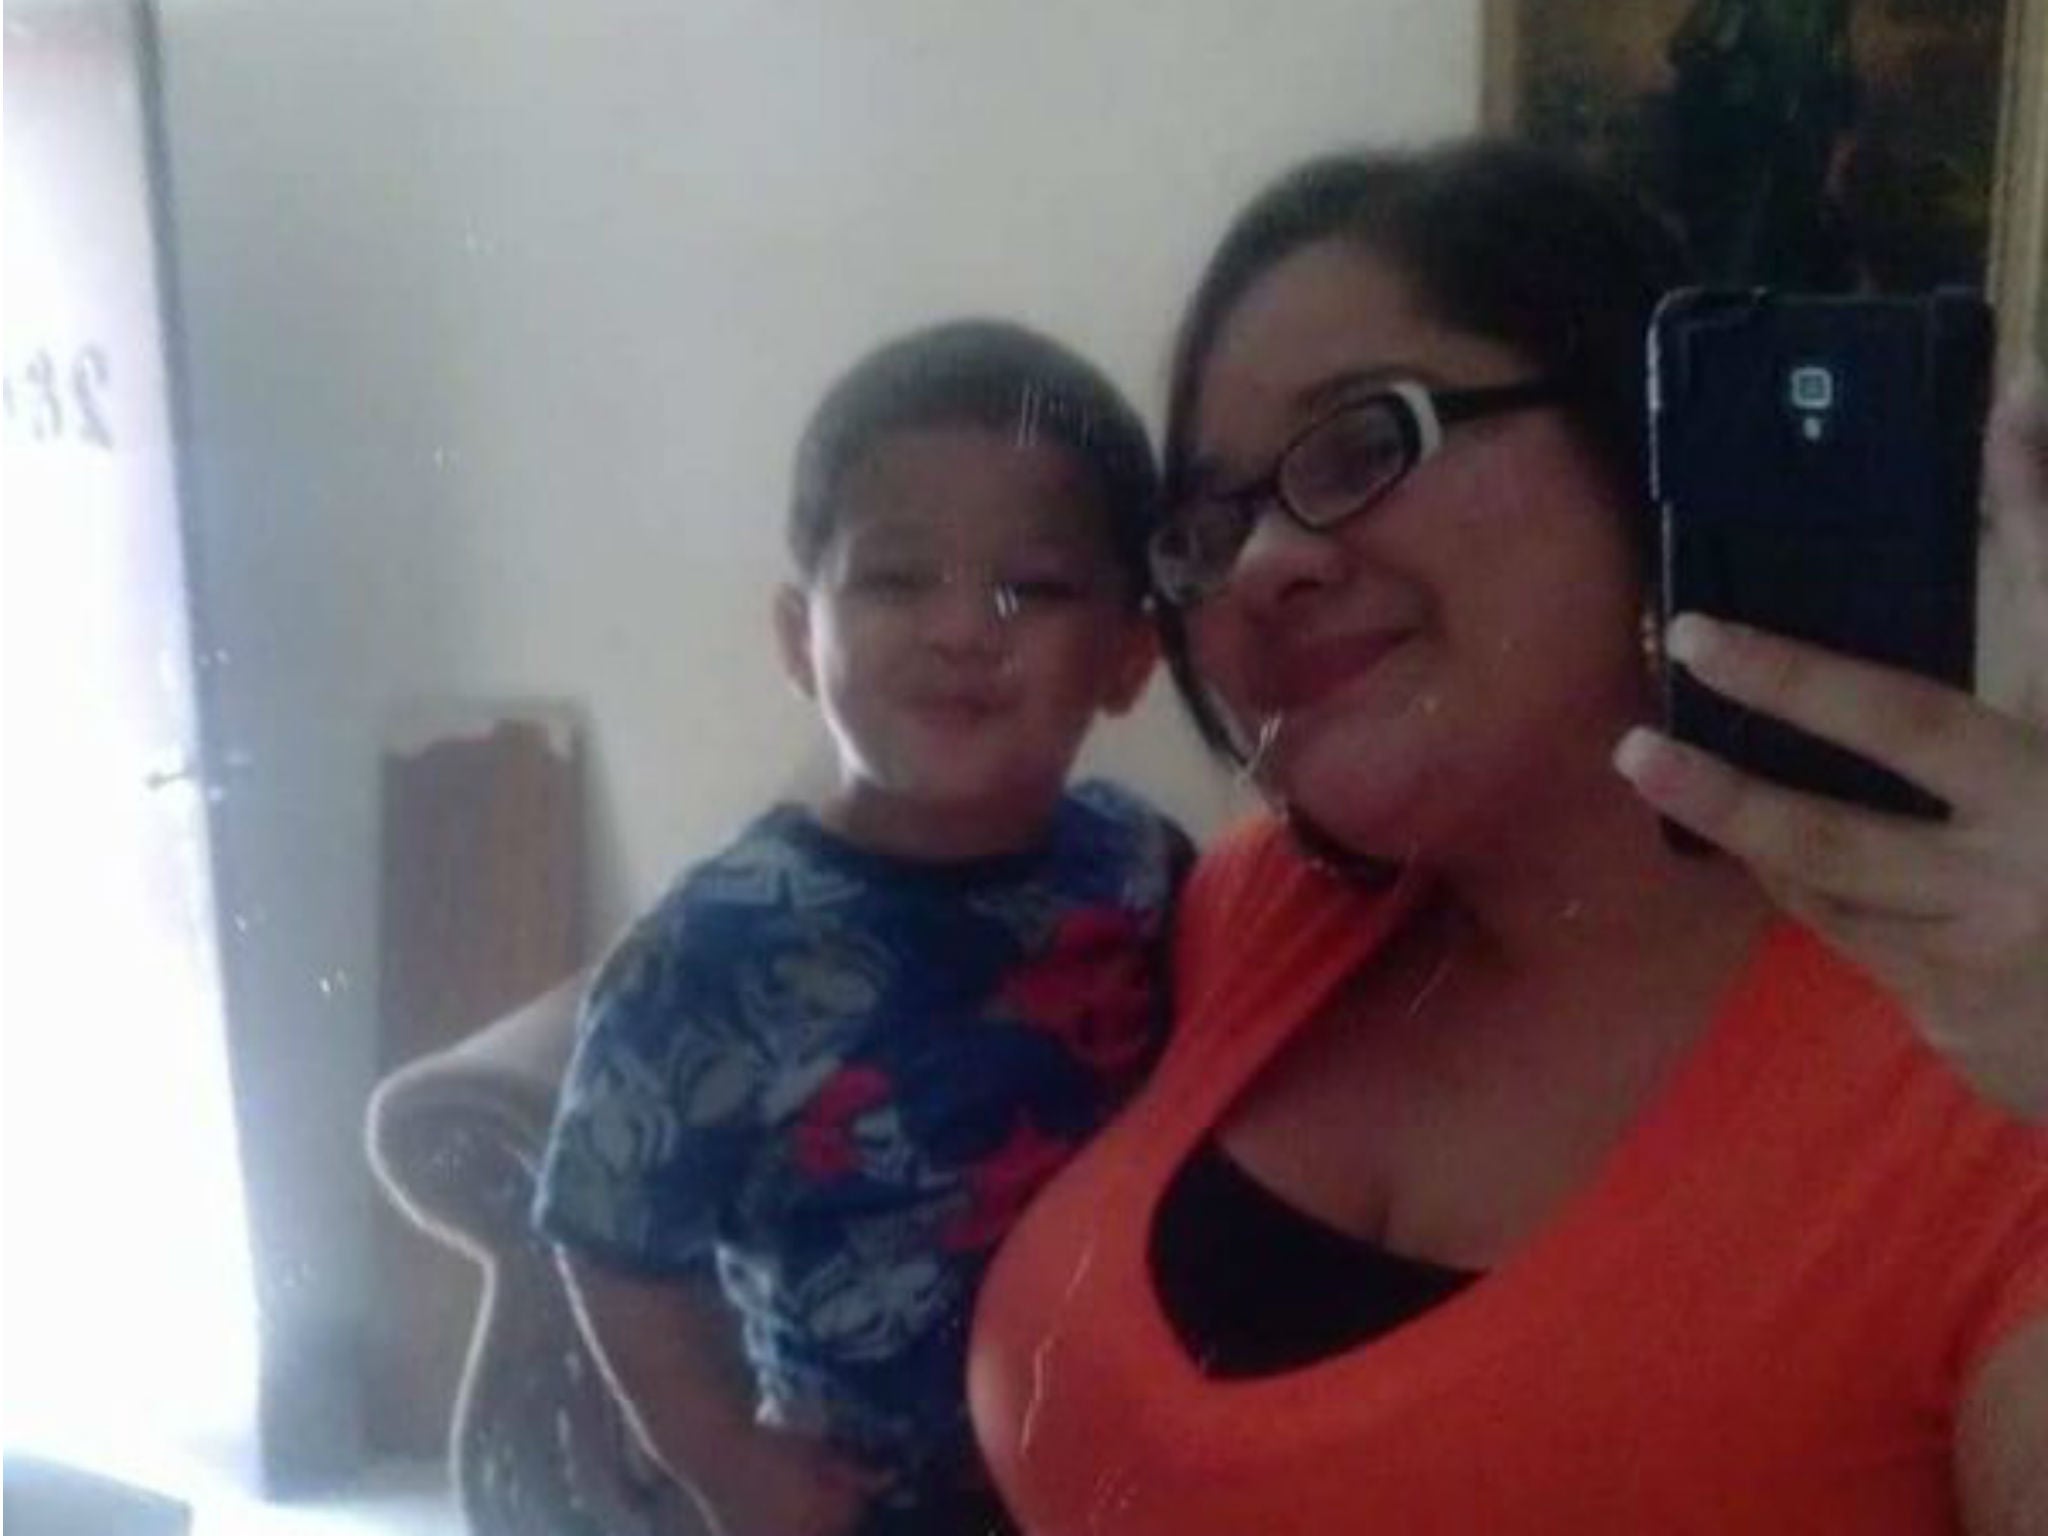 Both mother and toddler died in the blaze